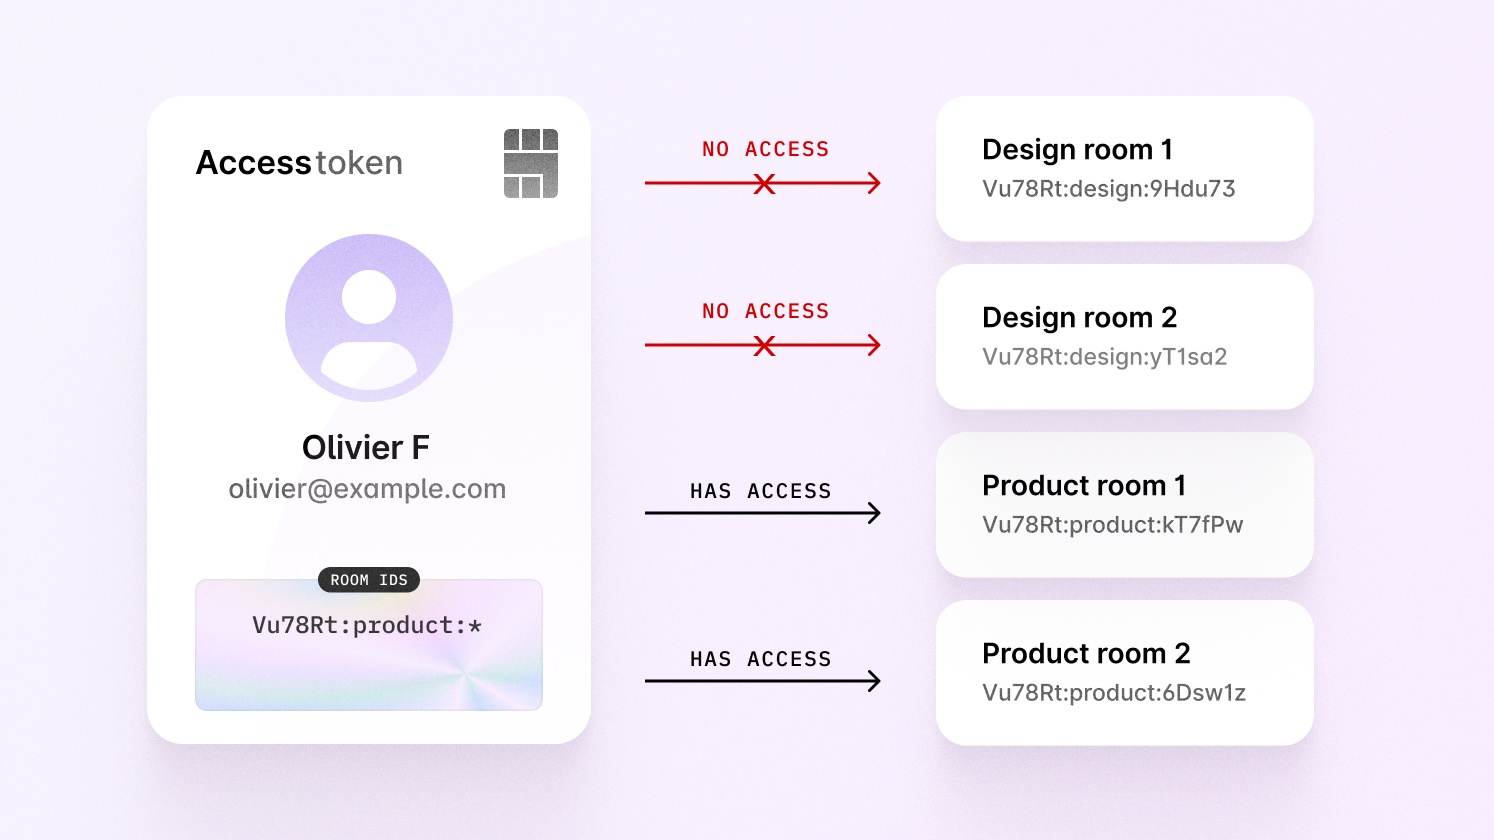 An access token using a wildcard to access product rooms